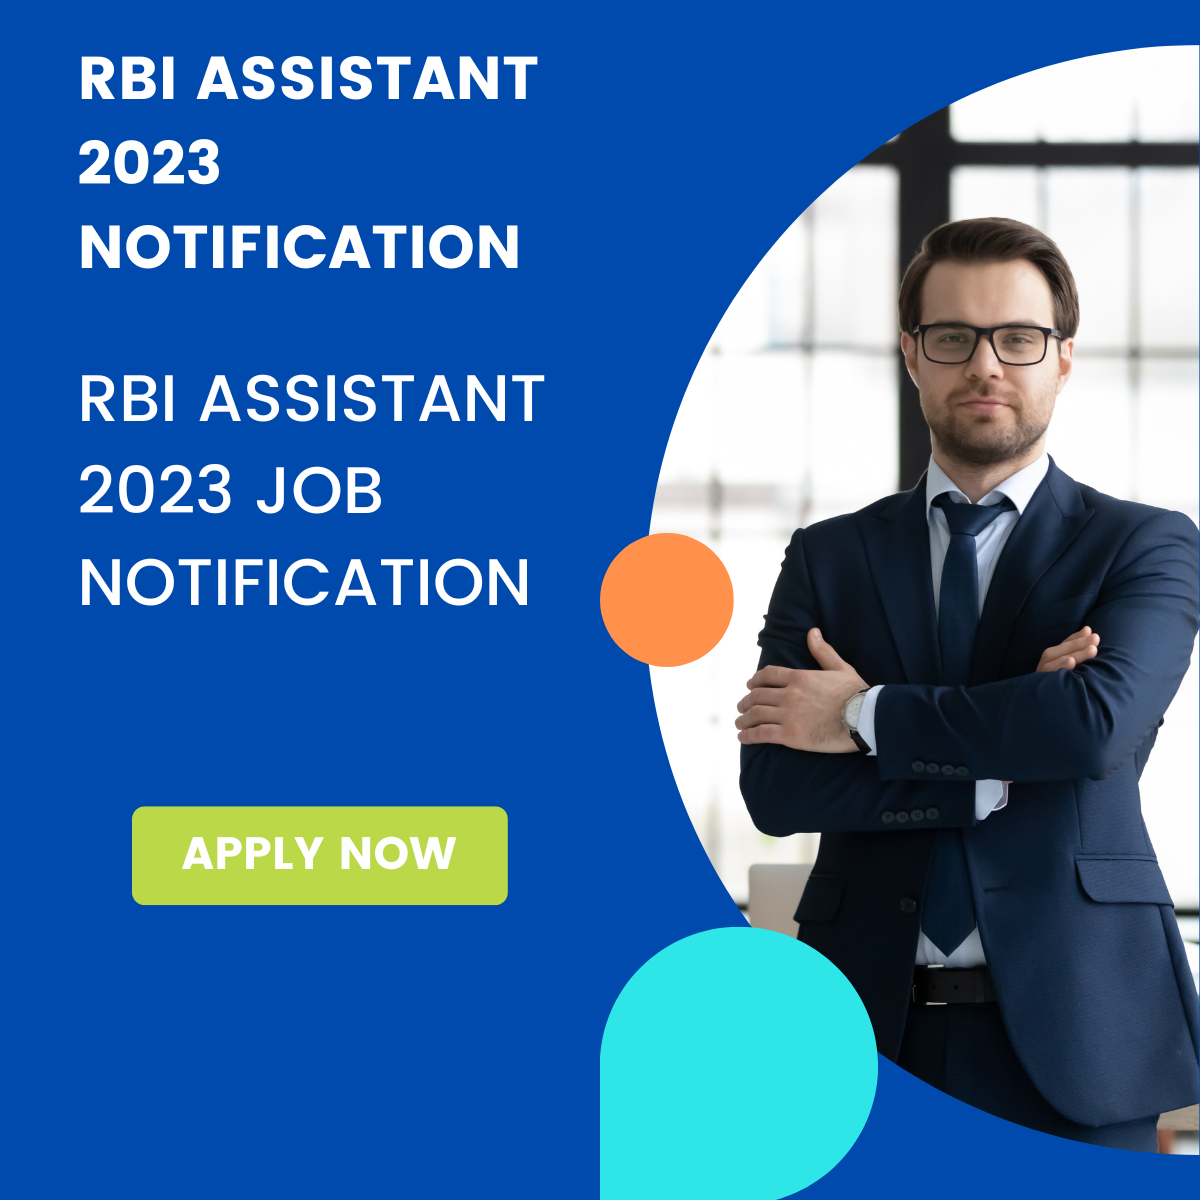 RBI Assistant 2023 notification